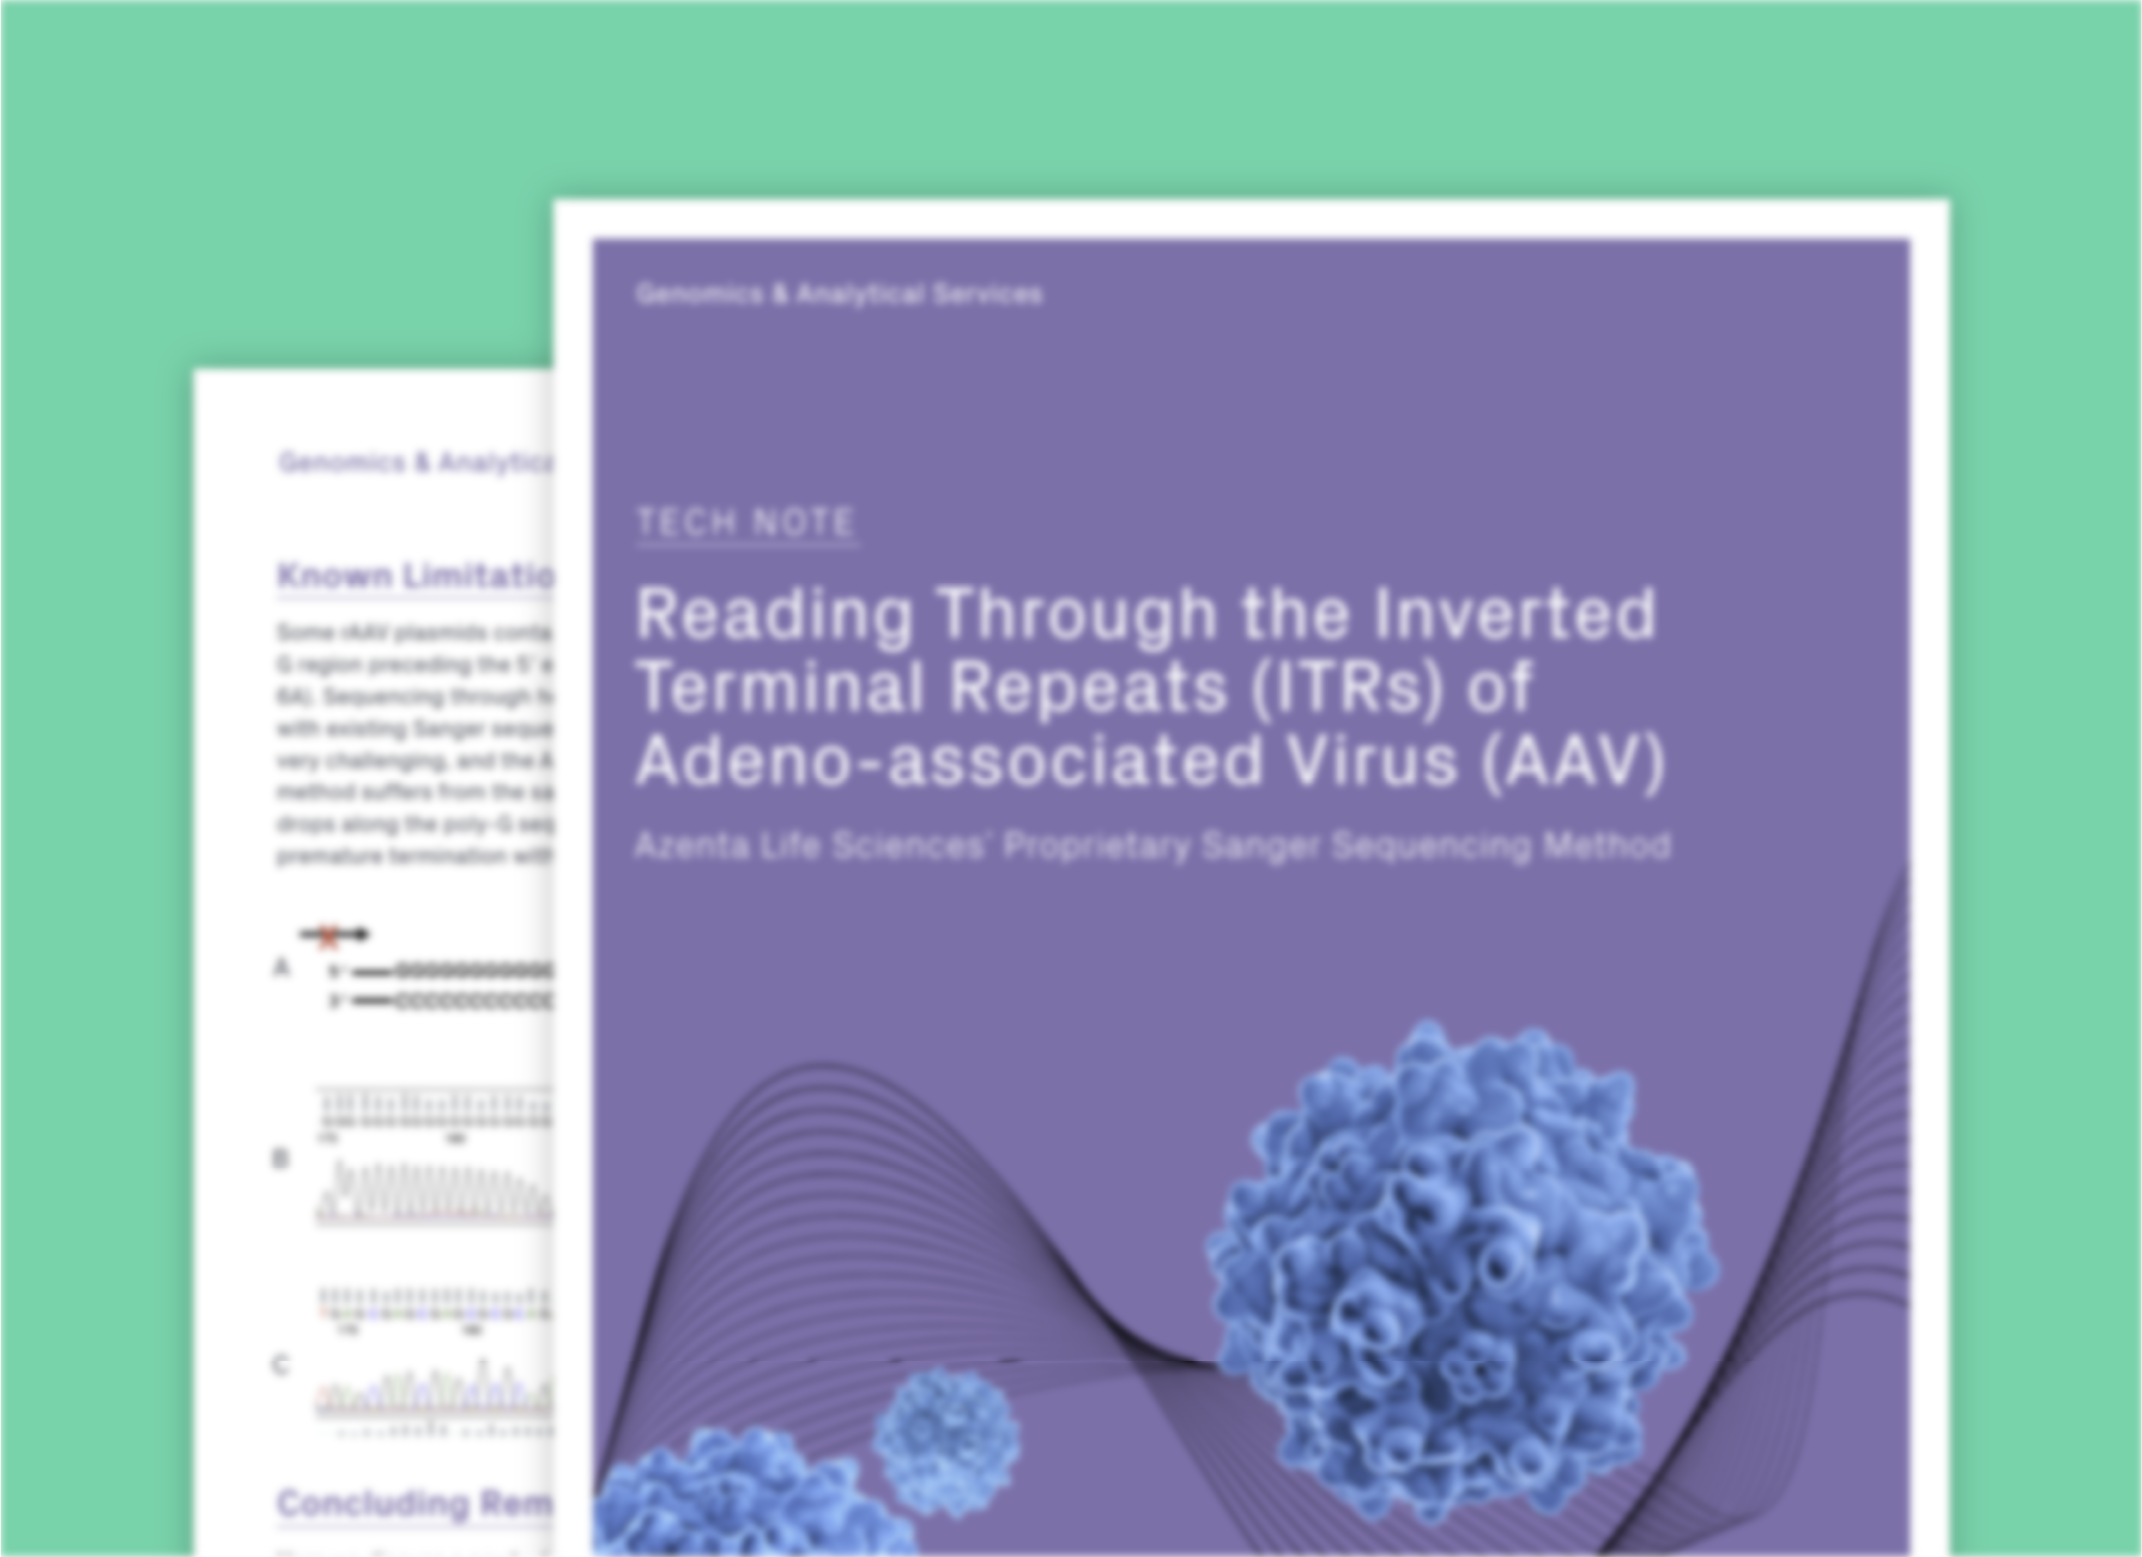 AAV ITR Sequencing Case Study